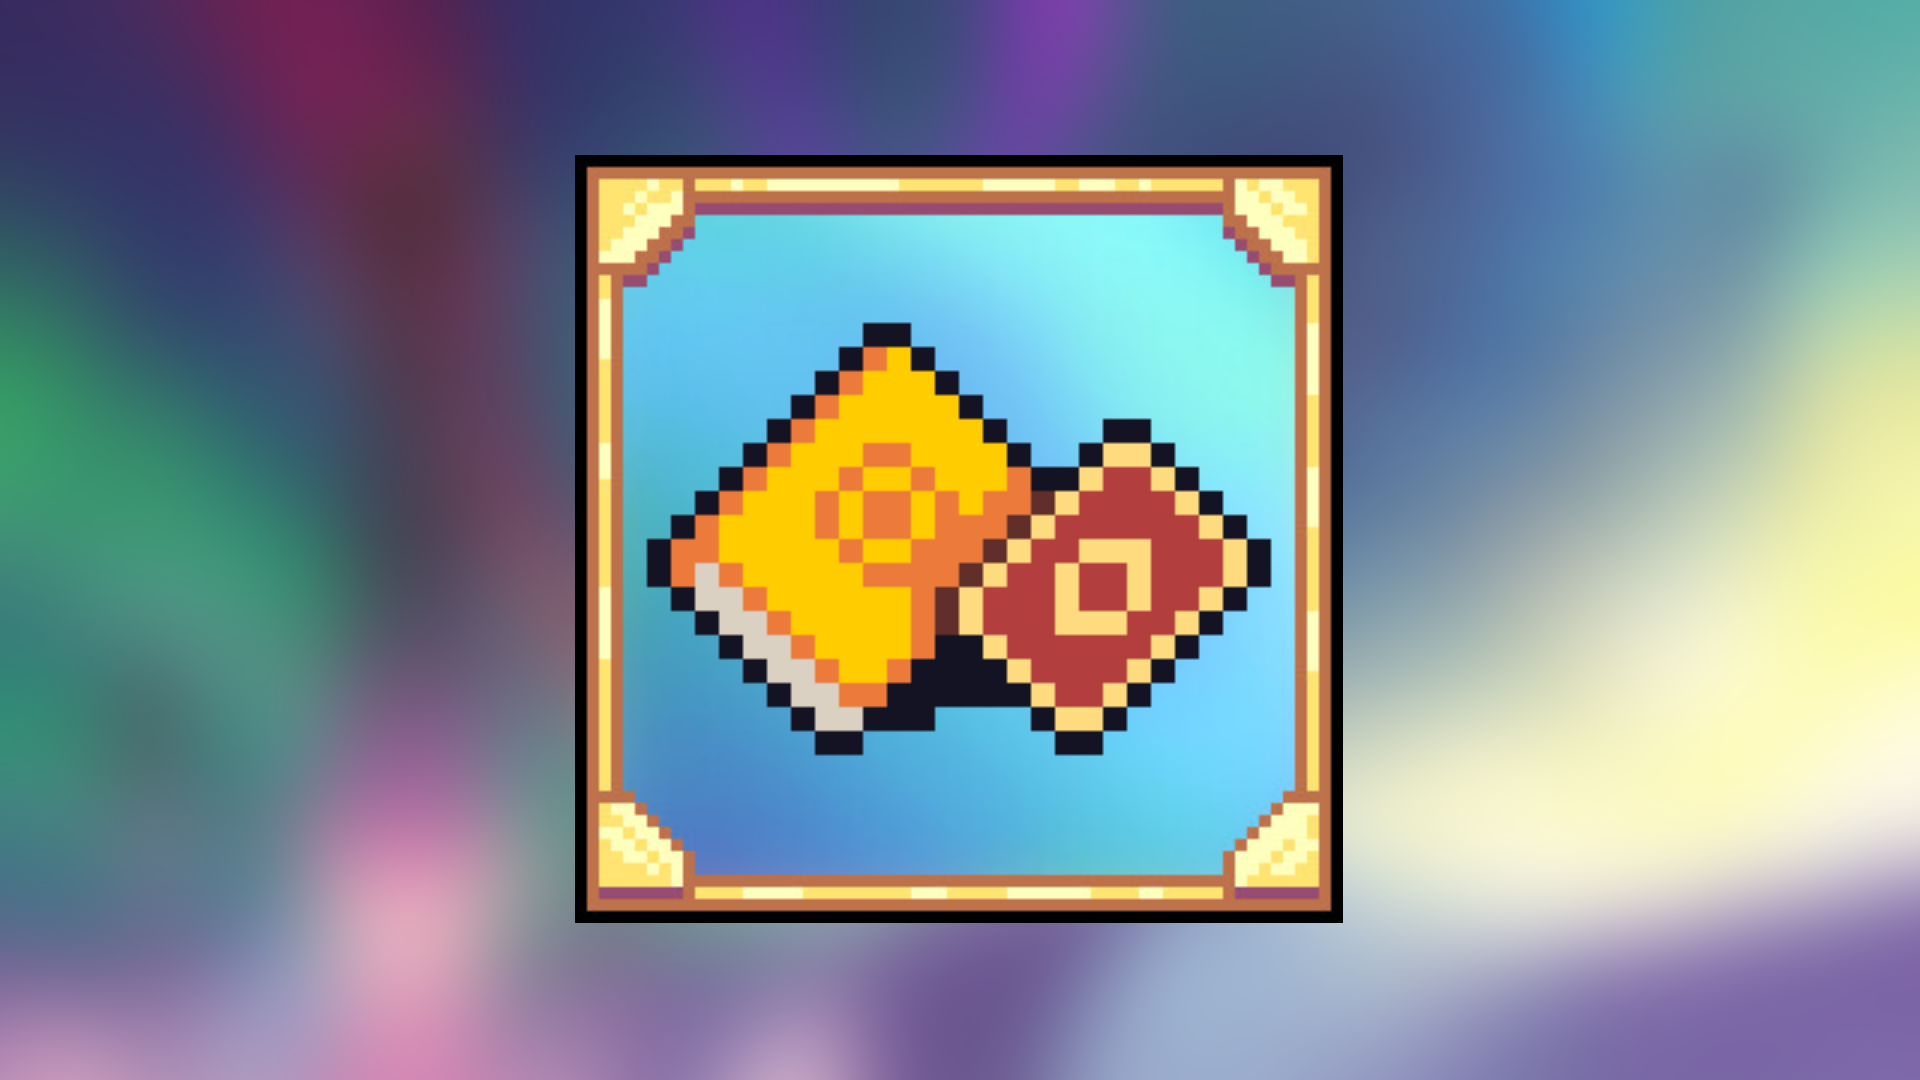 Icon for Card Completionist